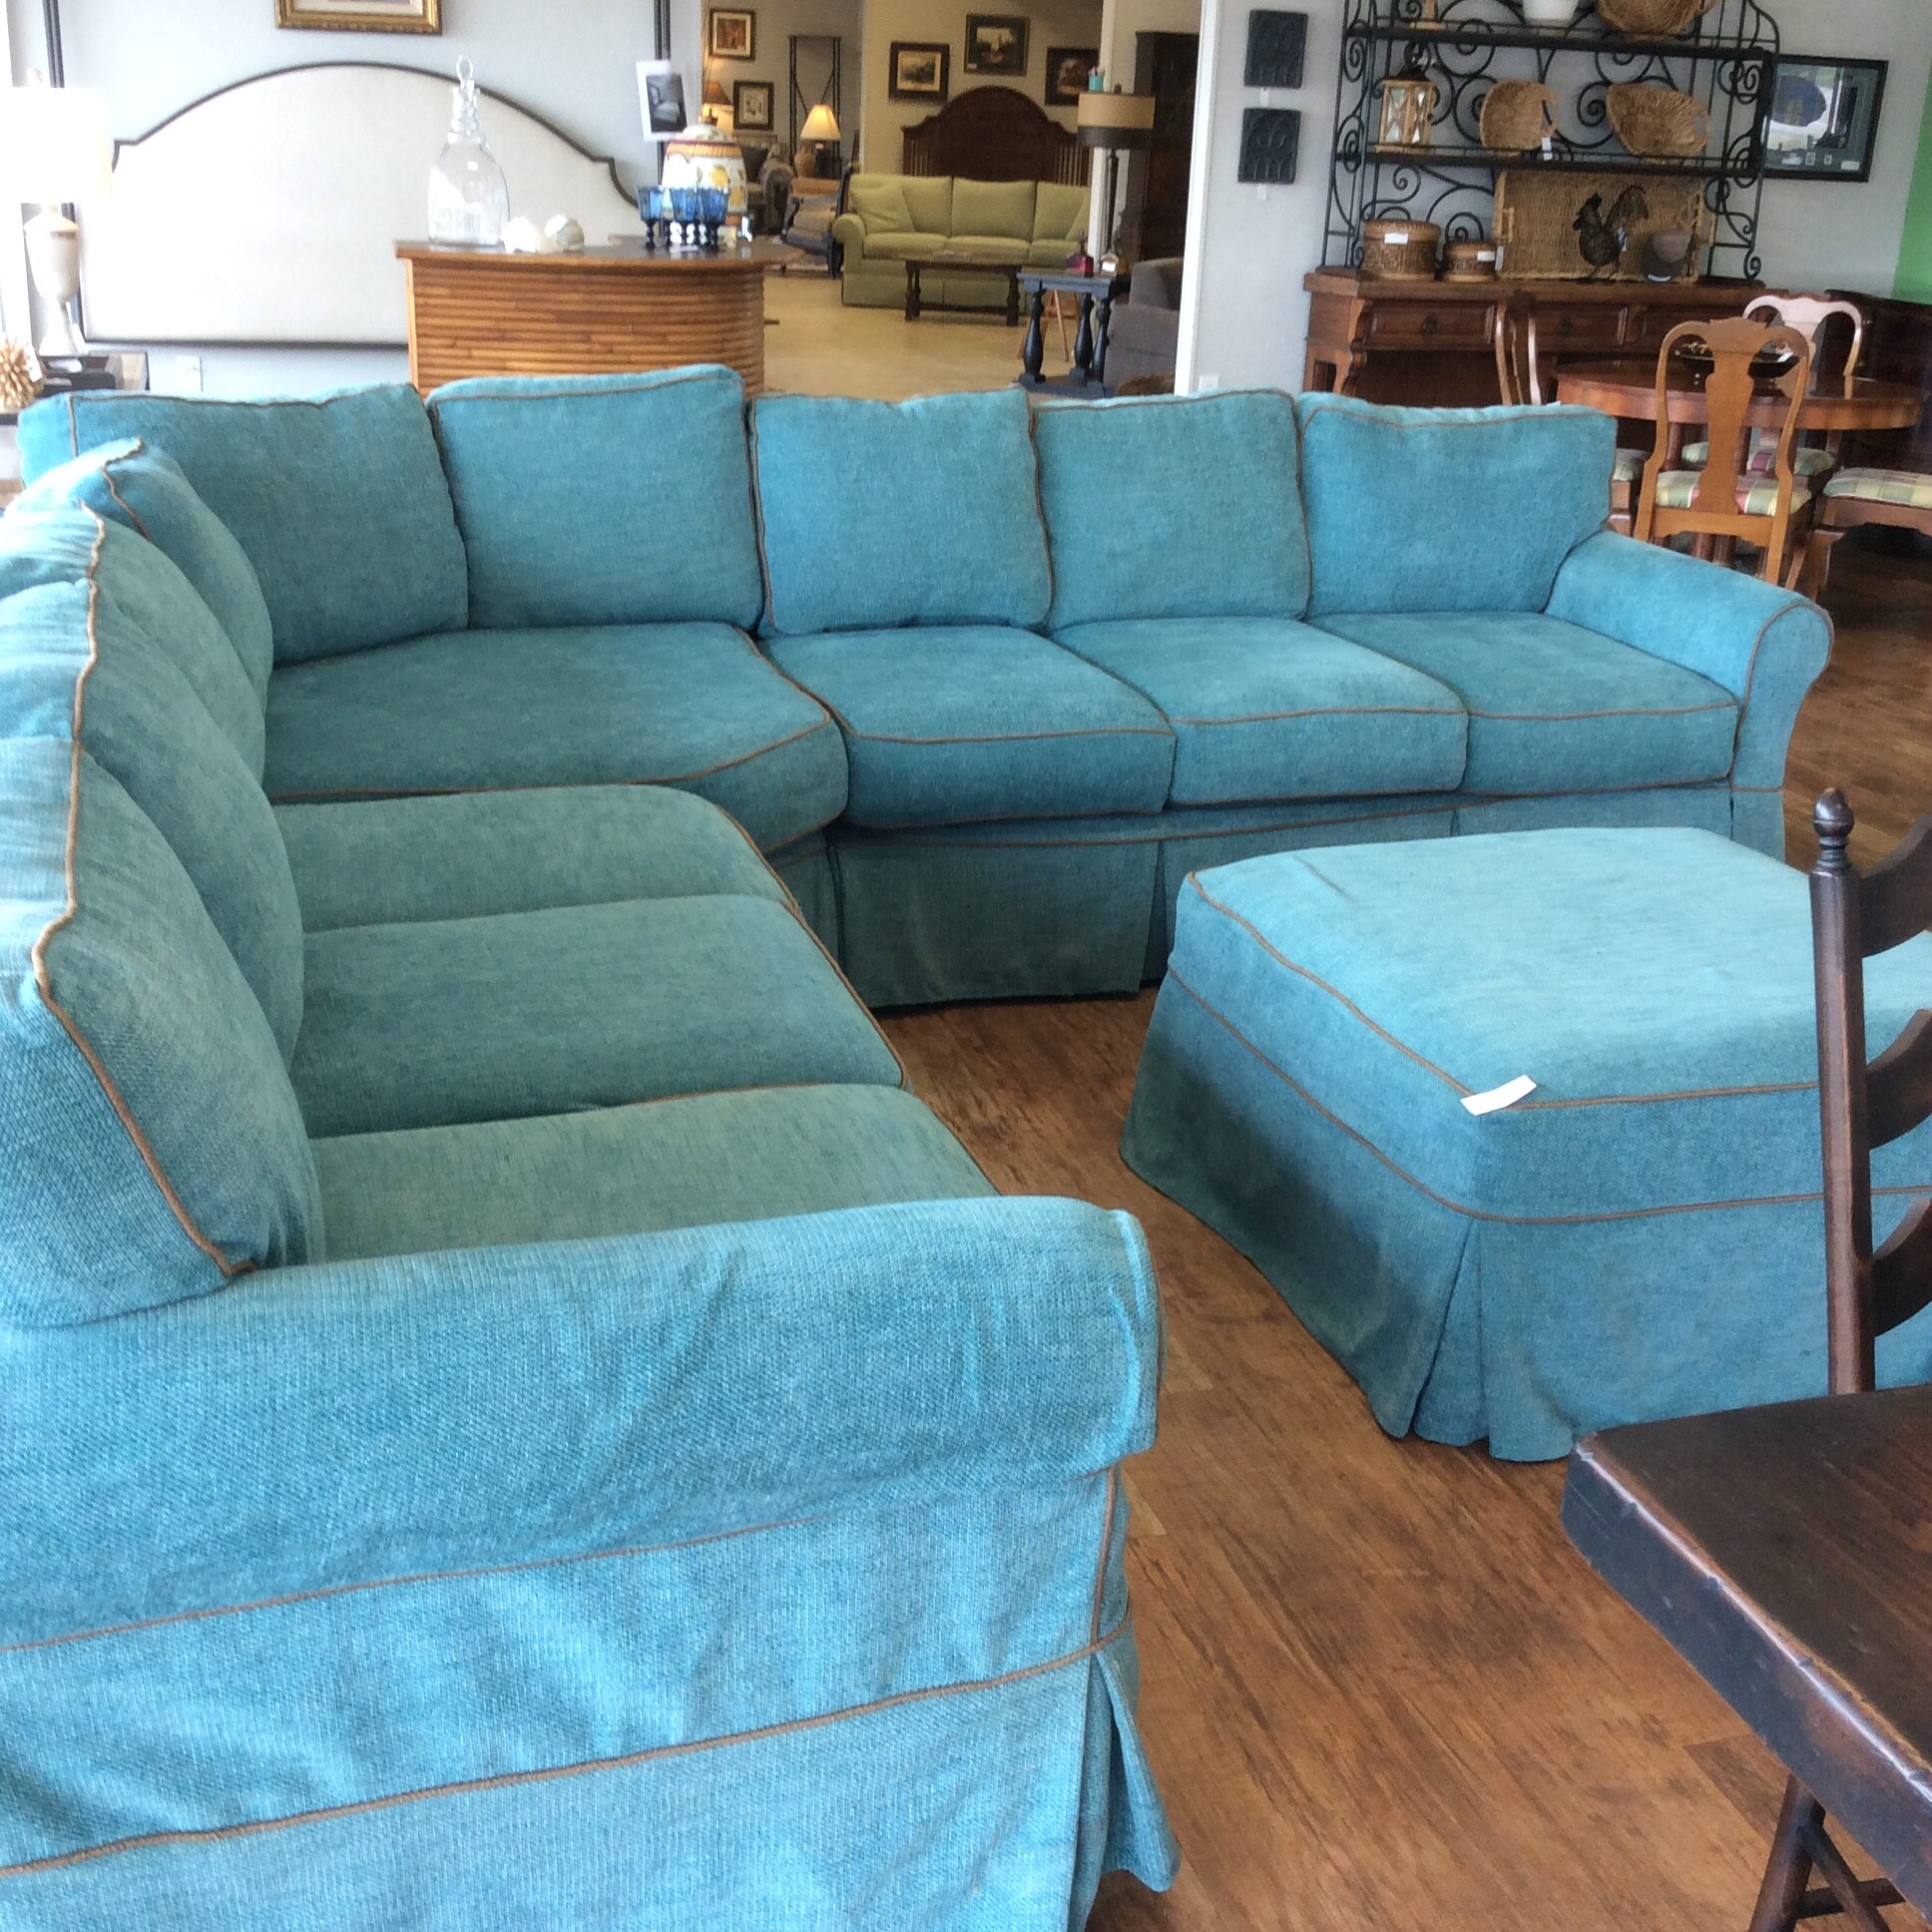 This large custom L shaped couch offers ample seating as well as comfort,. It's slip covered in a blue tweed fabric for easy cleaning.